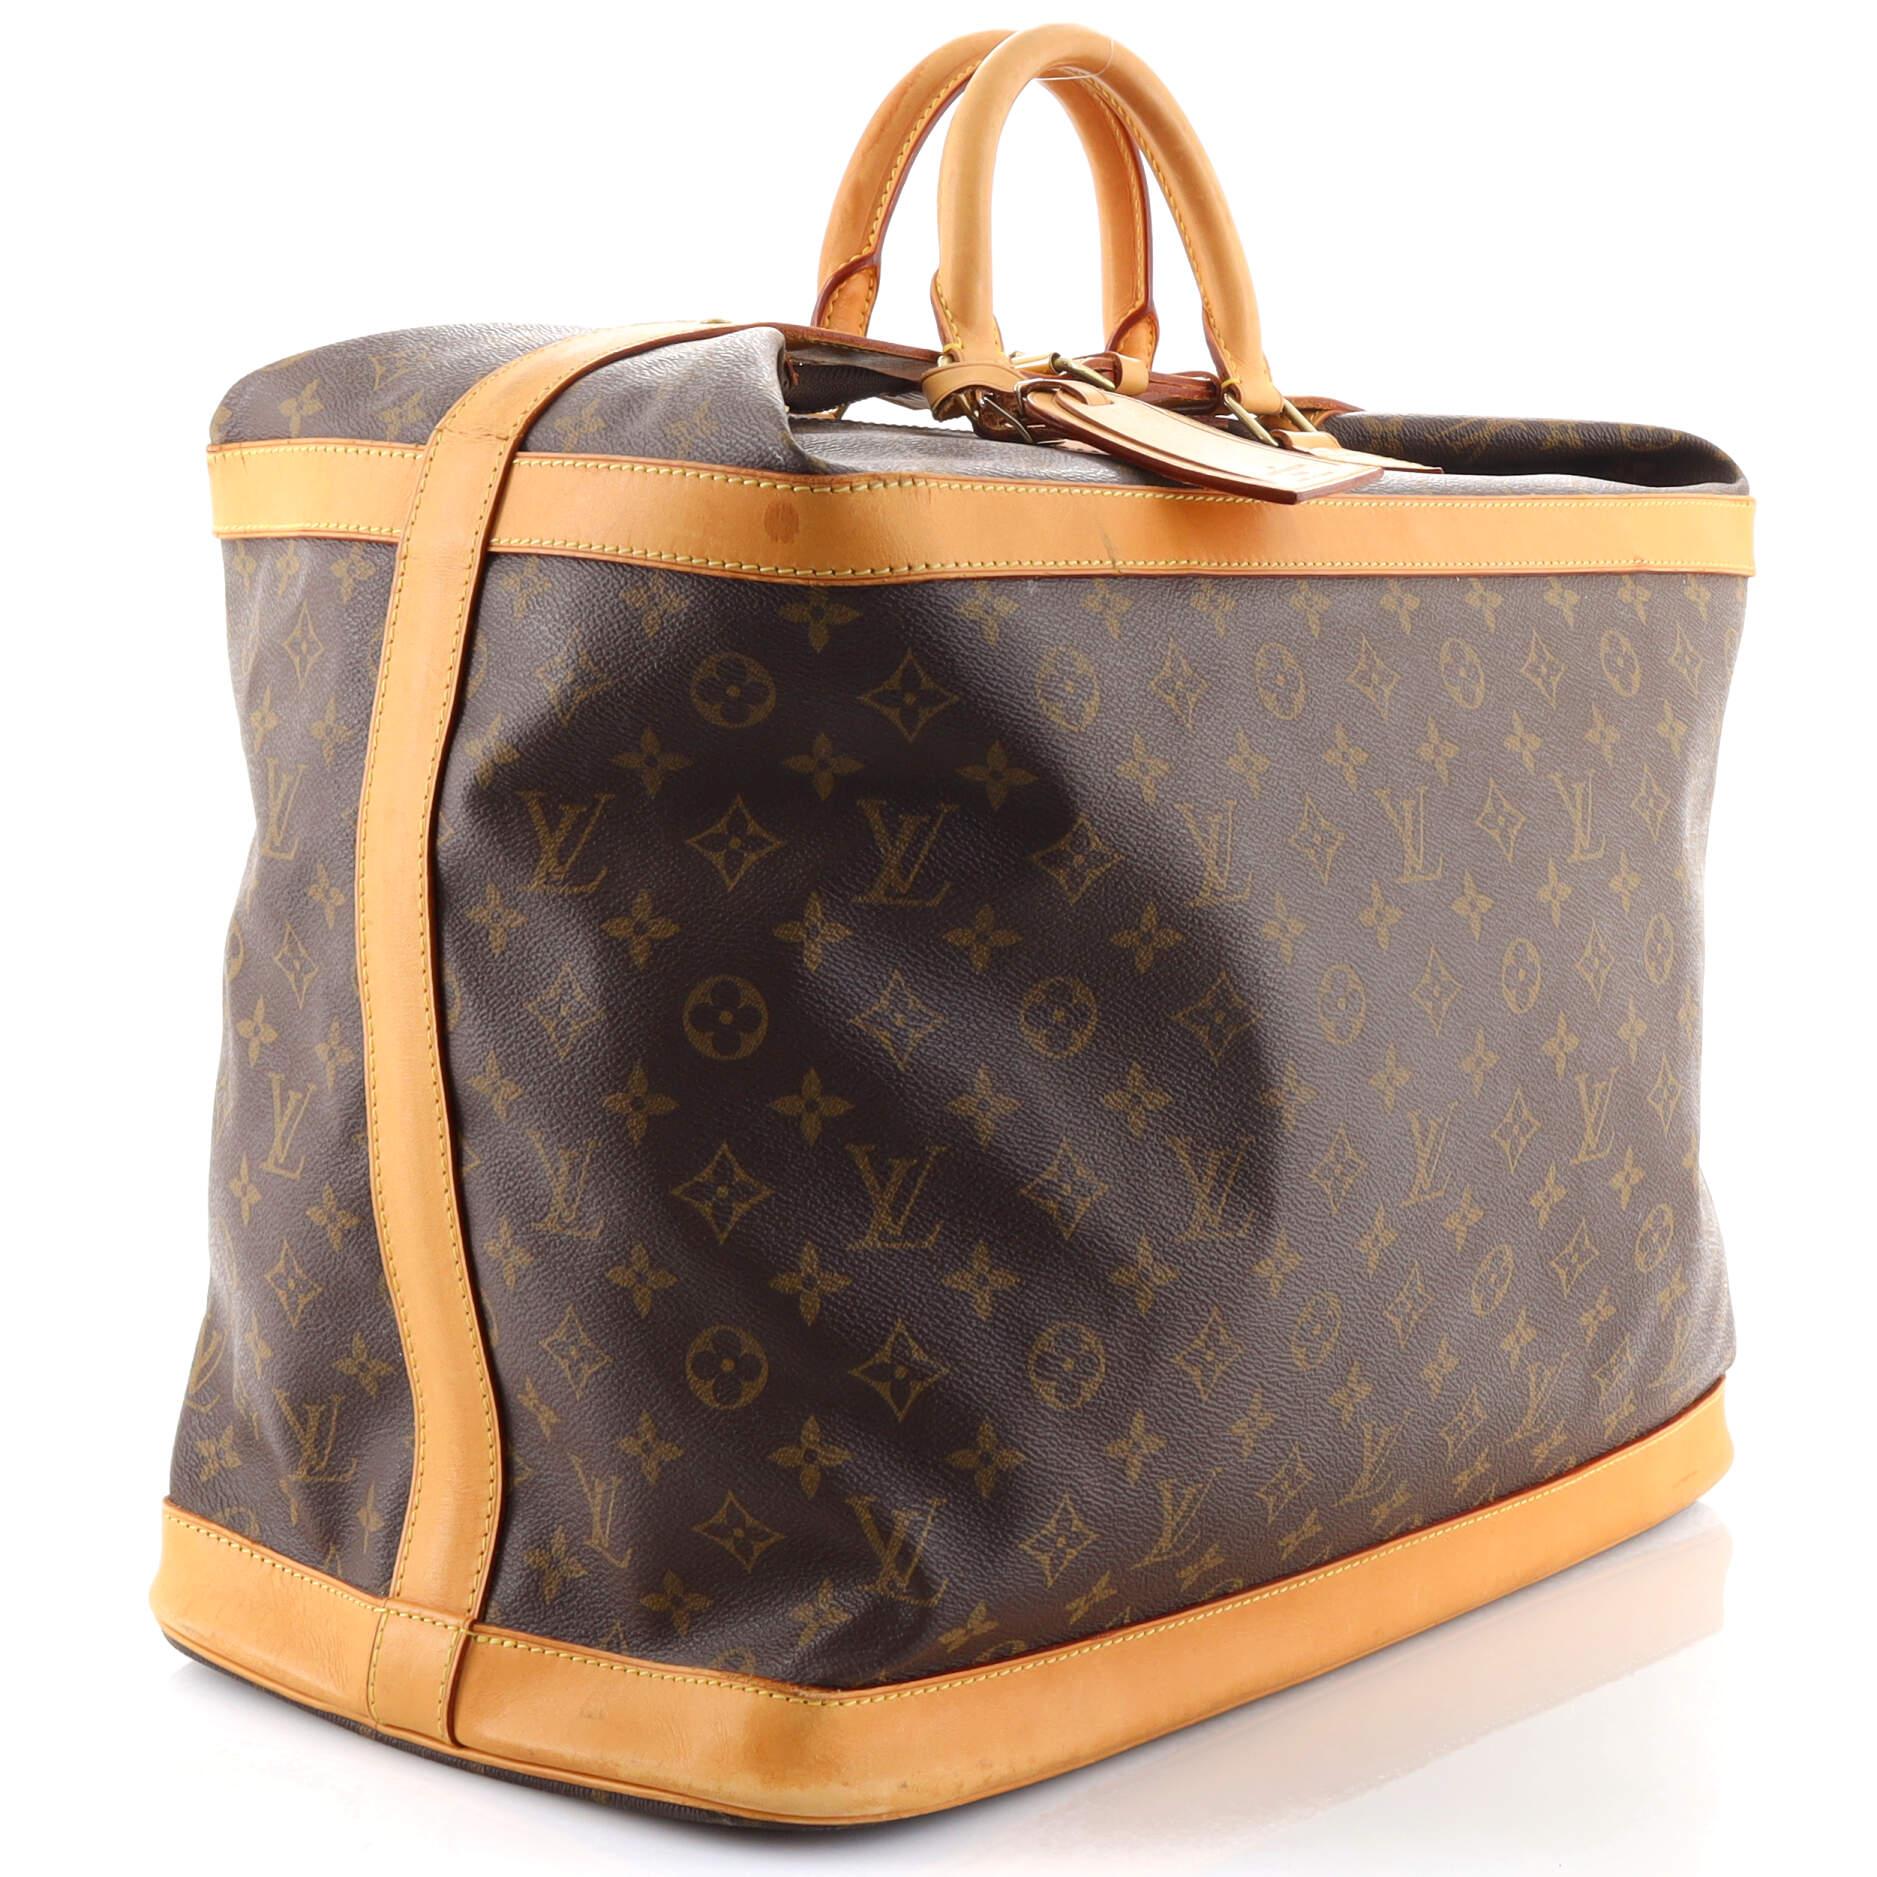 WHAT IS IN MY PURSE: ft. Louis Vuitton City Cruiser PM bag 